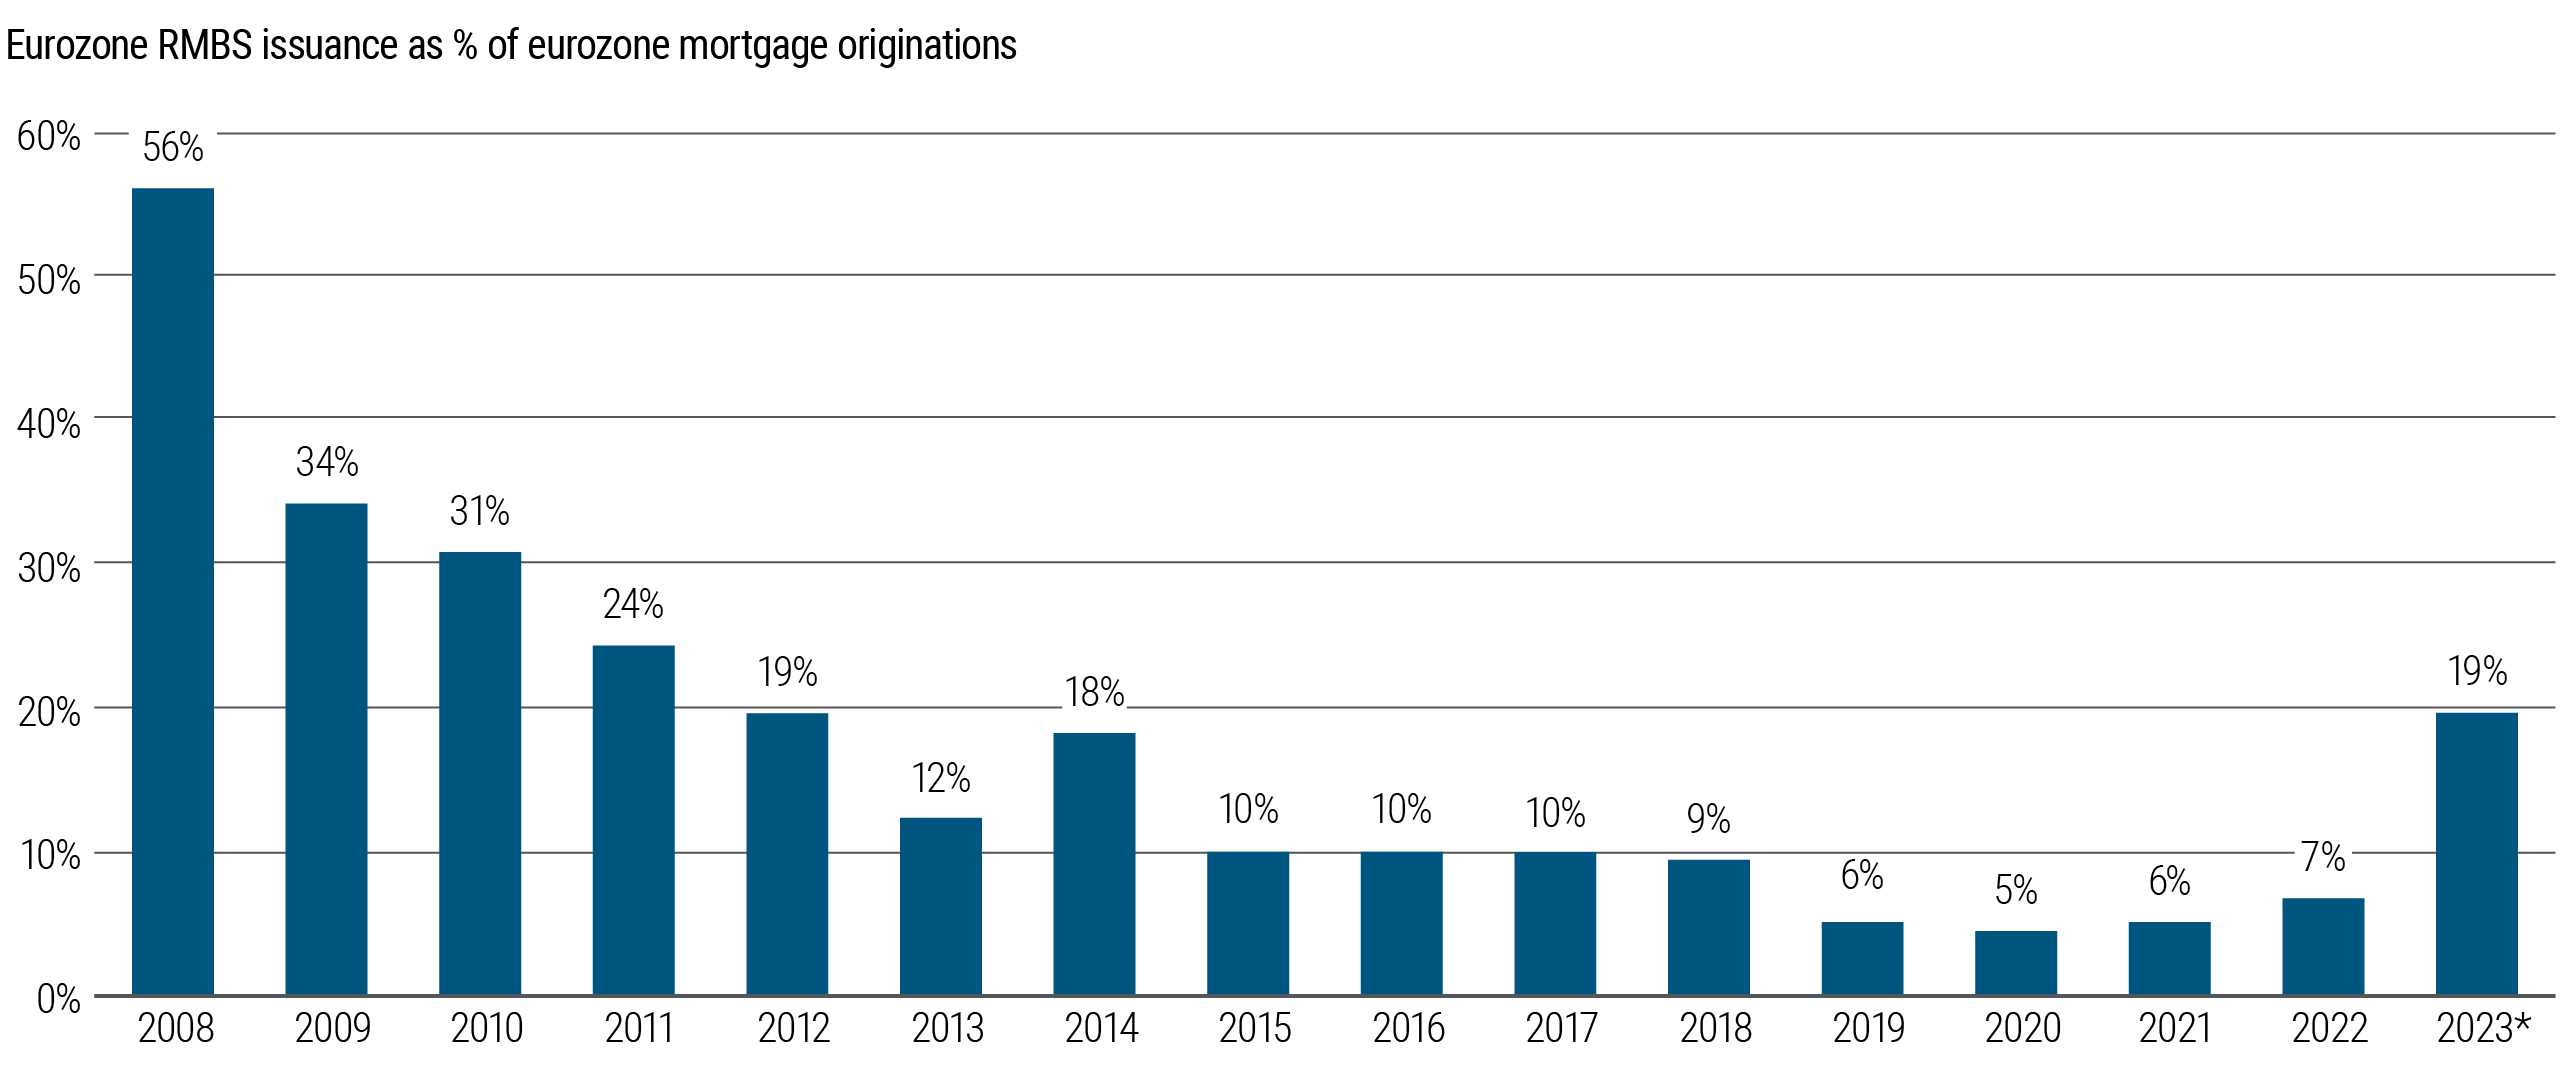 Figure 3: The graph shows the percentage of Eurozone mortgages that are securitized. Prior to the financial crisis, roughly 50% of mortgages entered the securitisation market, while after the financial crisis, banks have been less incentivized to securitise their assets, dropping to less than 10% on average in recent years. The lack of demand to securitize from banks contributes to the low overall securitization issuance mentioned in Figure 1.